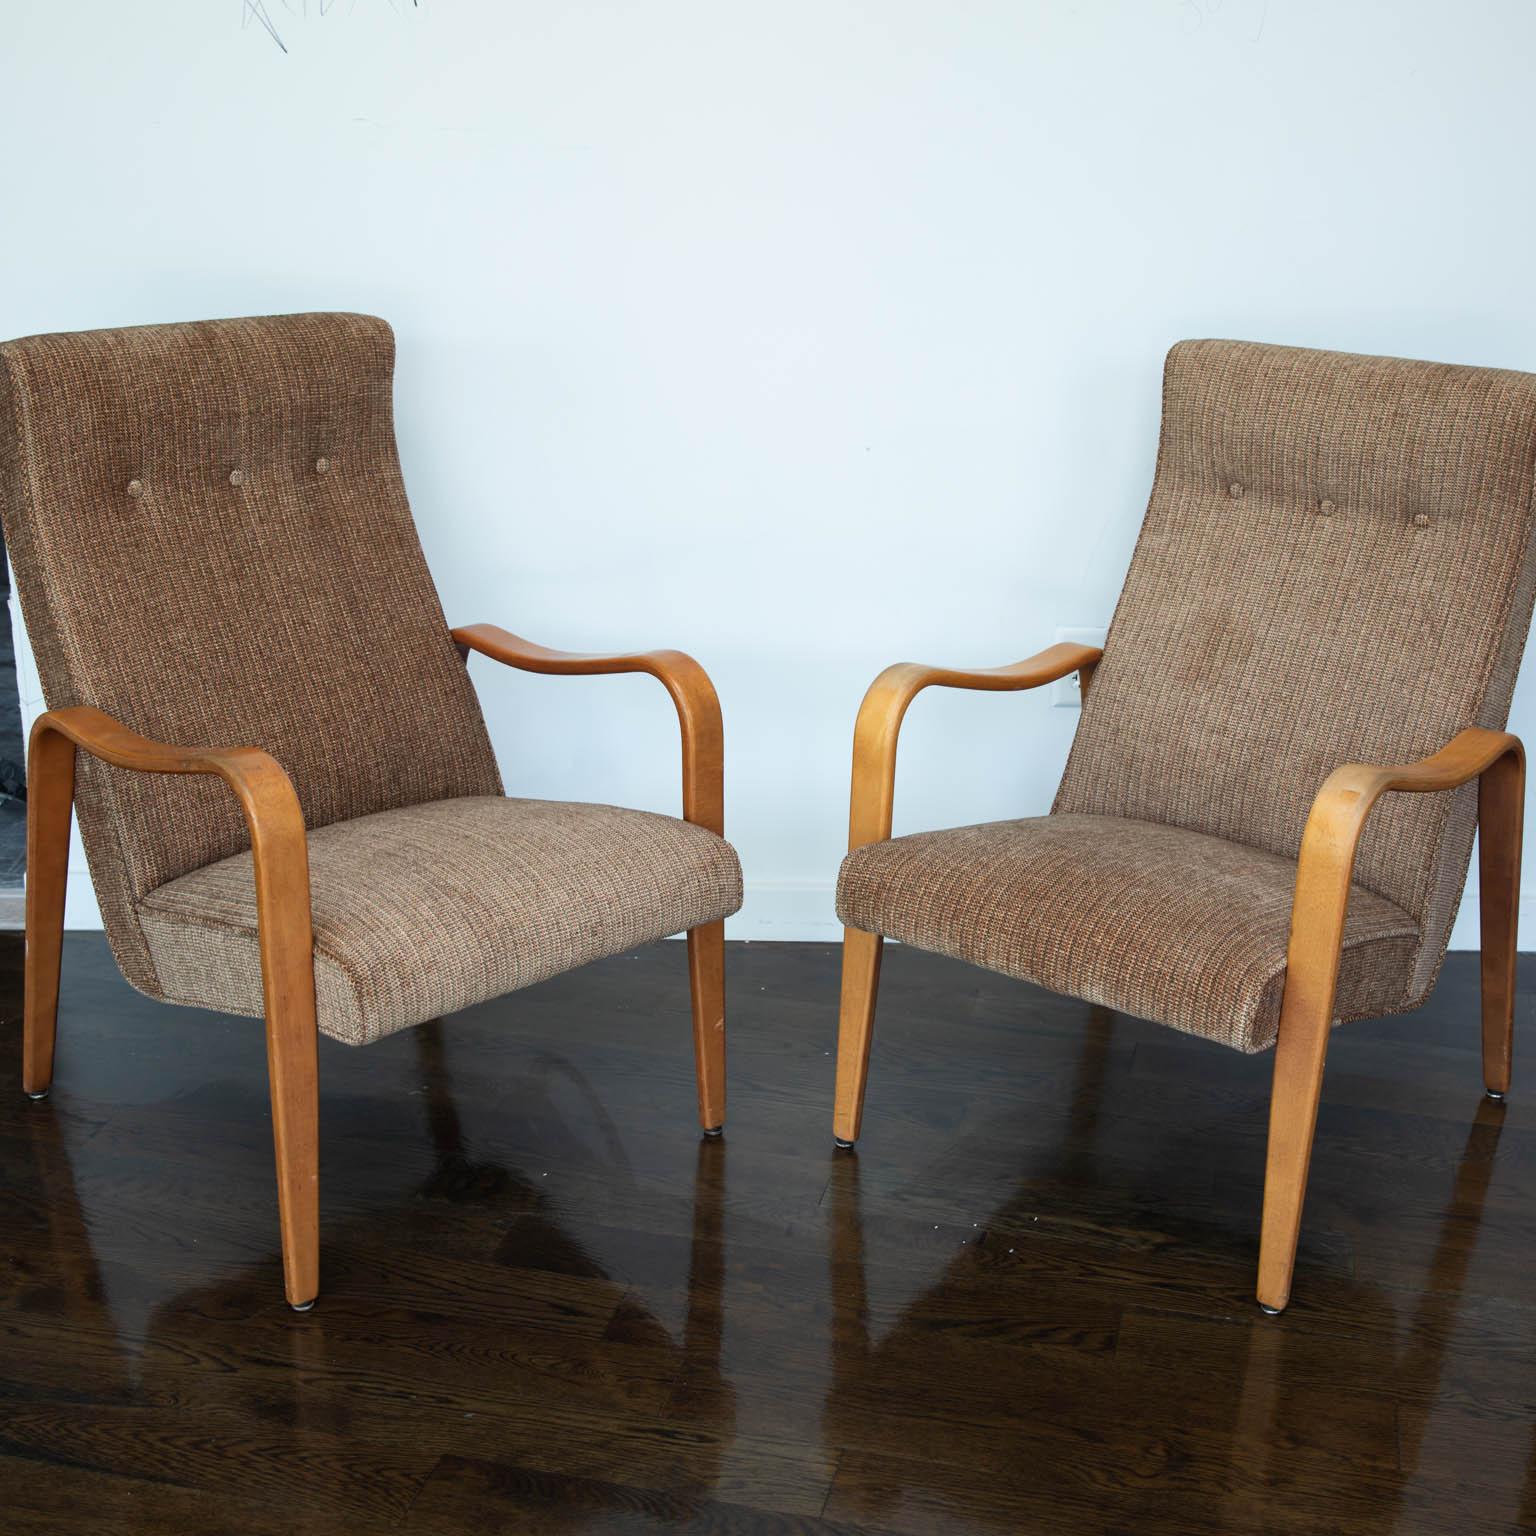 Fresh from an HBO movie about the life of Joe Paterno starring Al Pacino, this pair mid-century modern era tall back armchairs are in great original condition and have just been recovered in a brown, two toned chenile fabric.